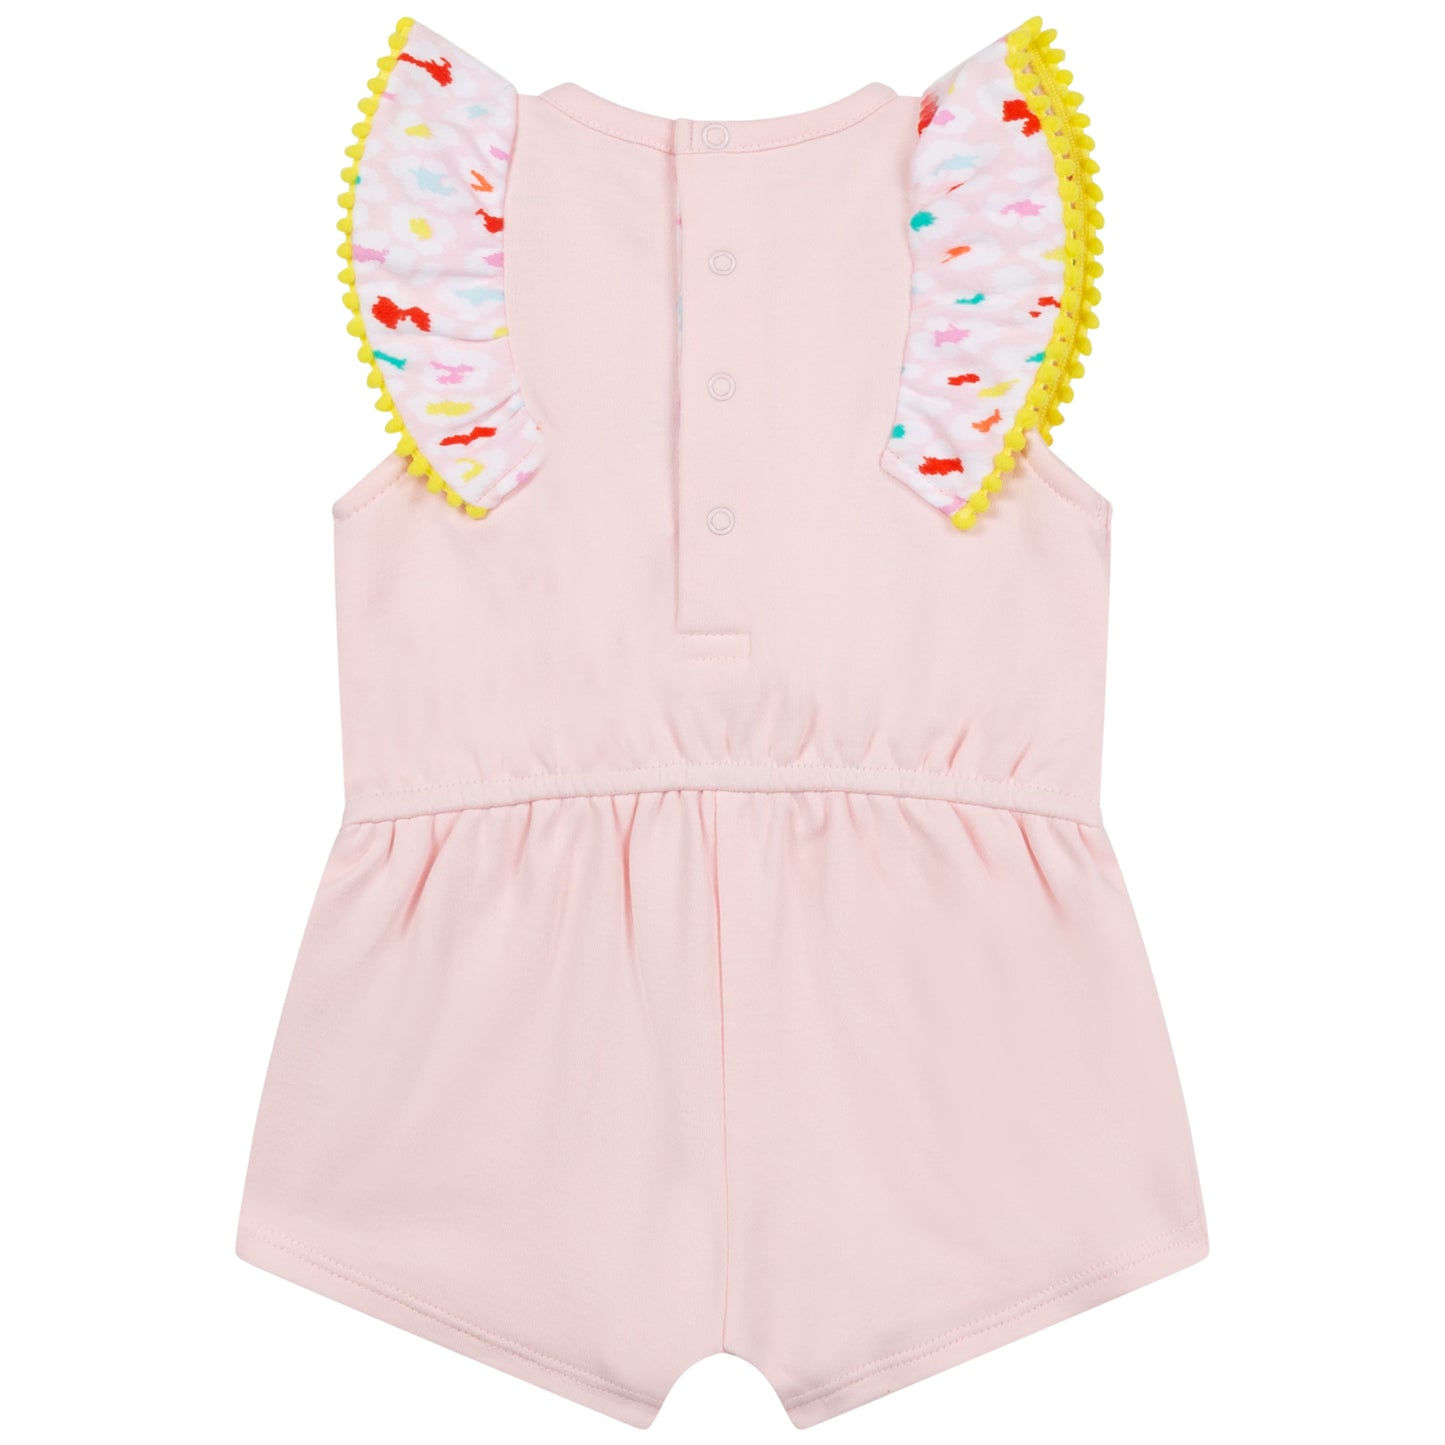 The Marc Jacobs Baby Girl Ruffles Romper